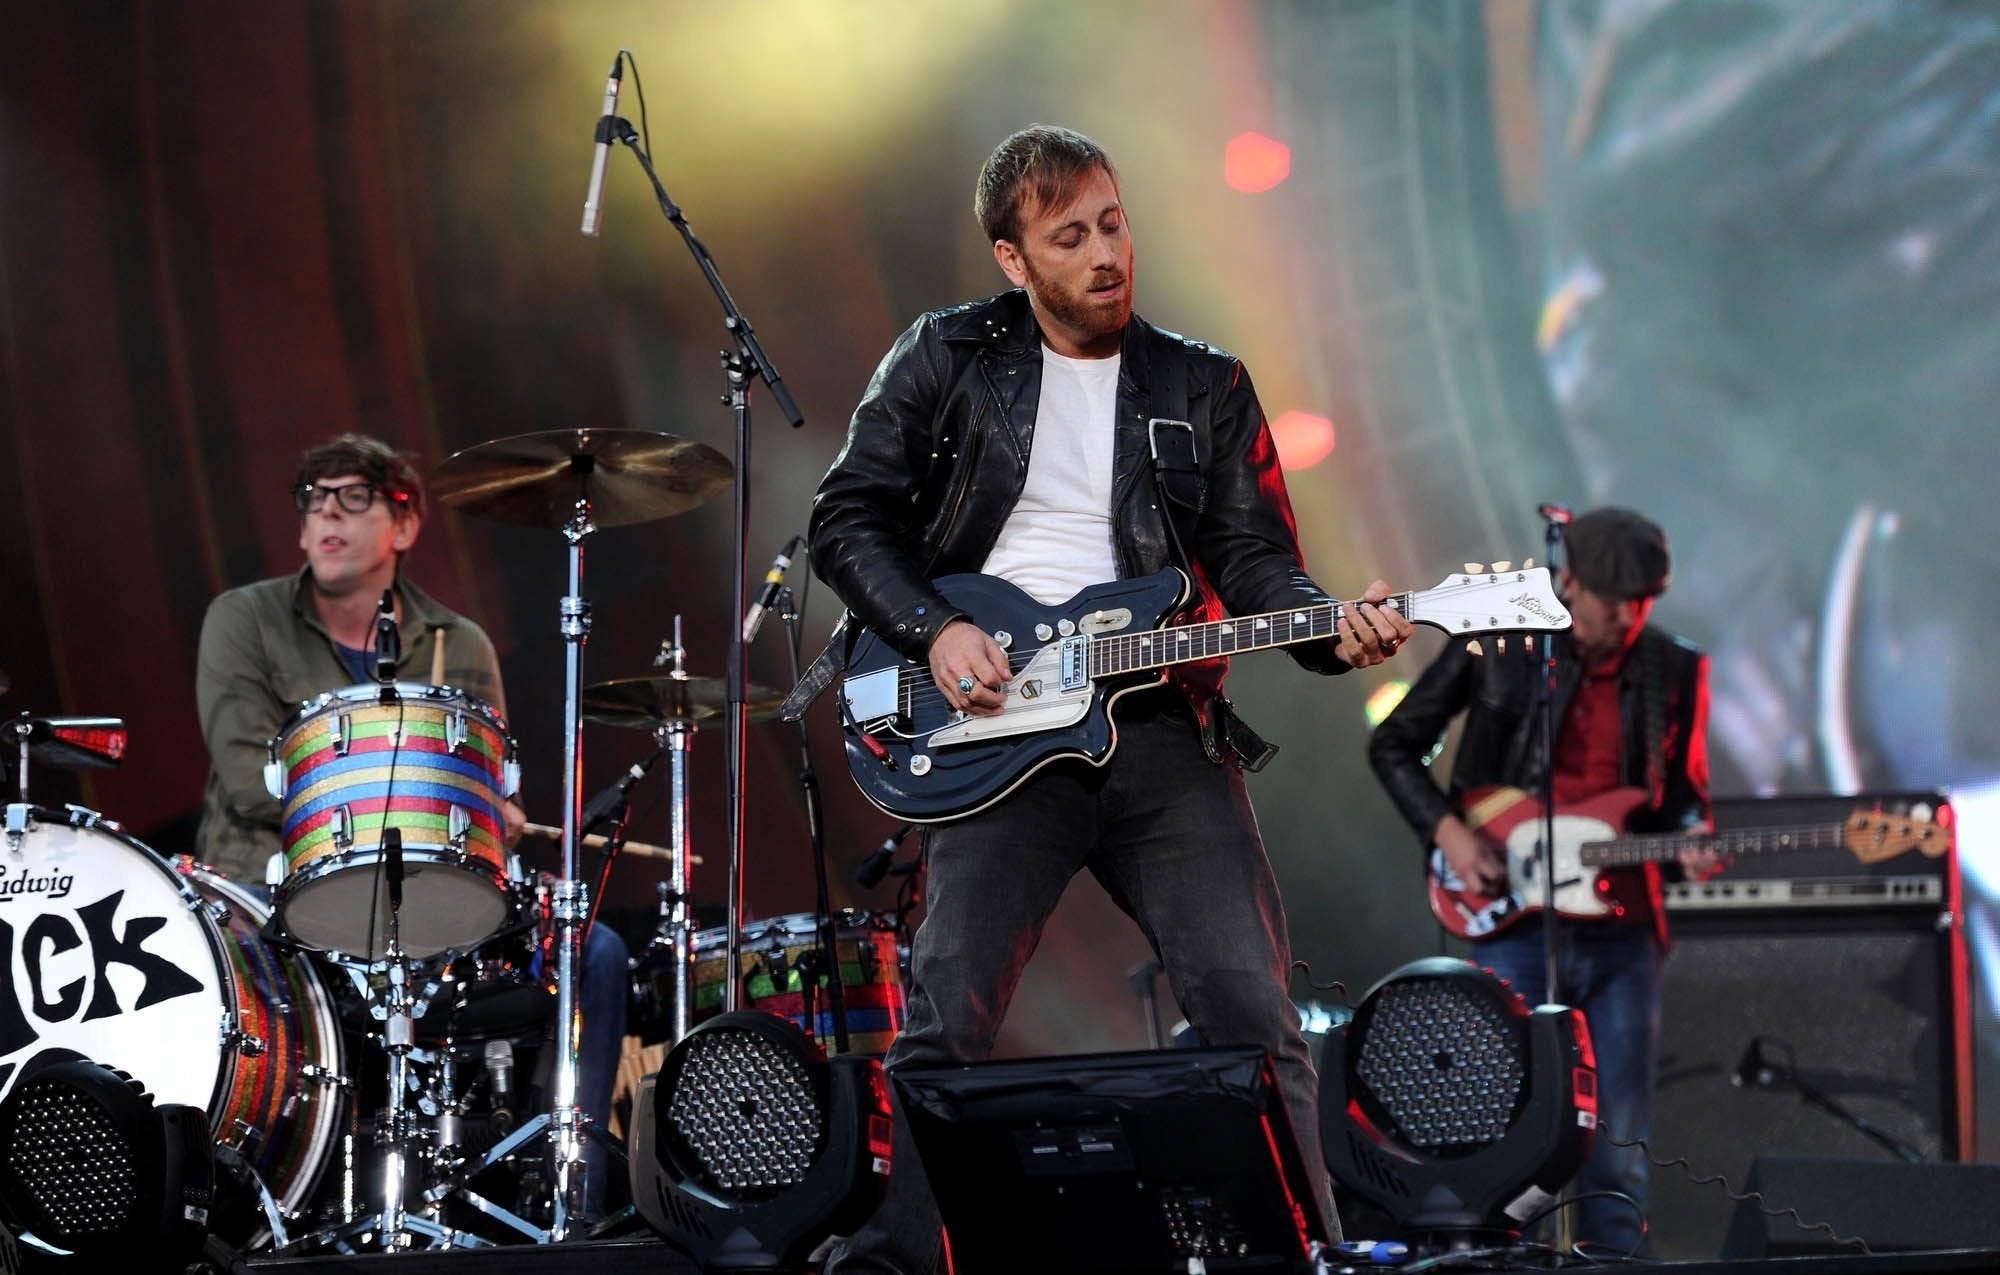 The Black Keys, Homecoming concert, Ready to rock, Music enthusiasts, 2000x1280 HD Desktop